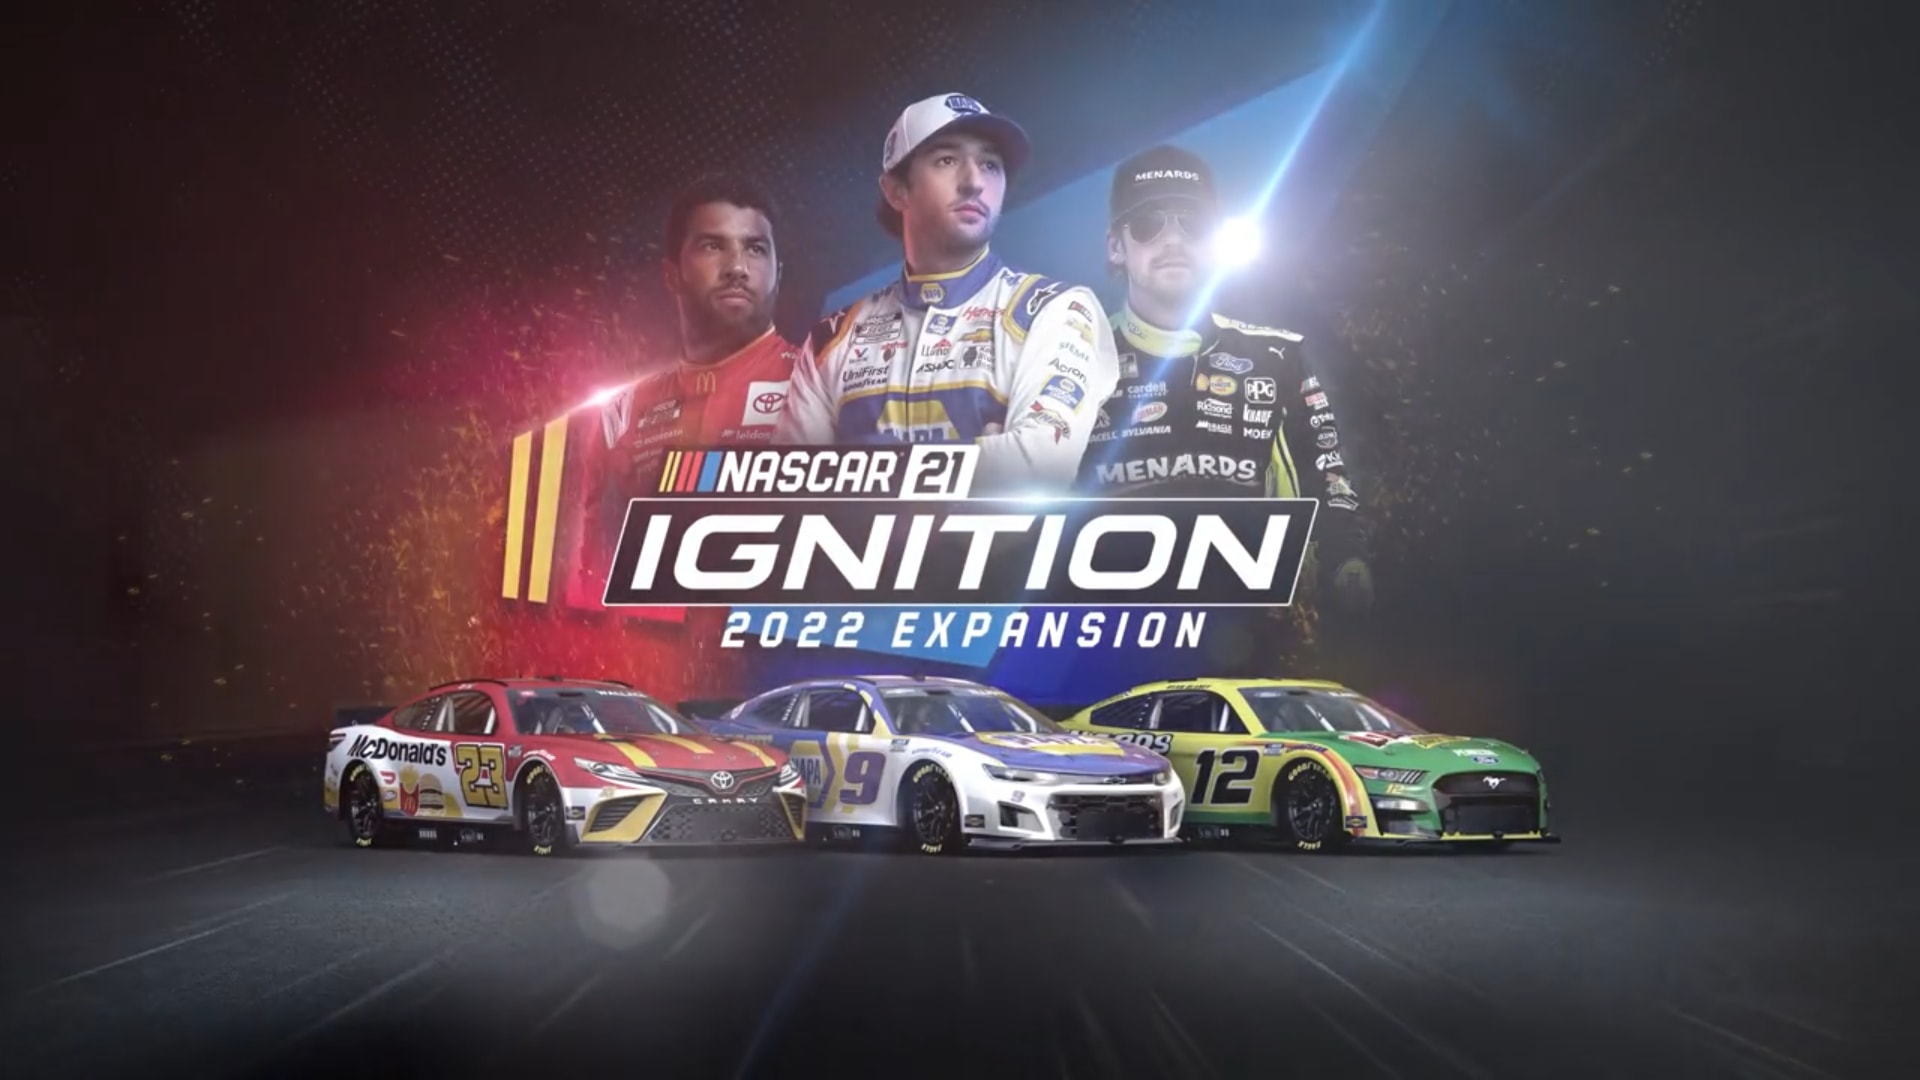 NASCAR 21 Ignition Getting Free 2022 Season Expansion Next Month